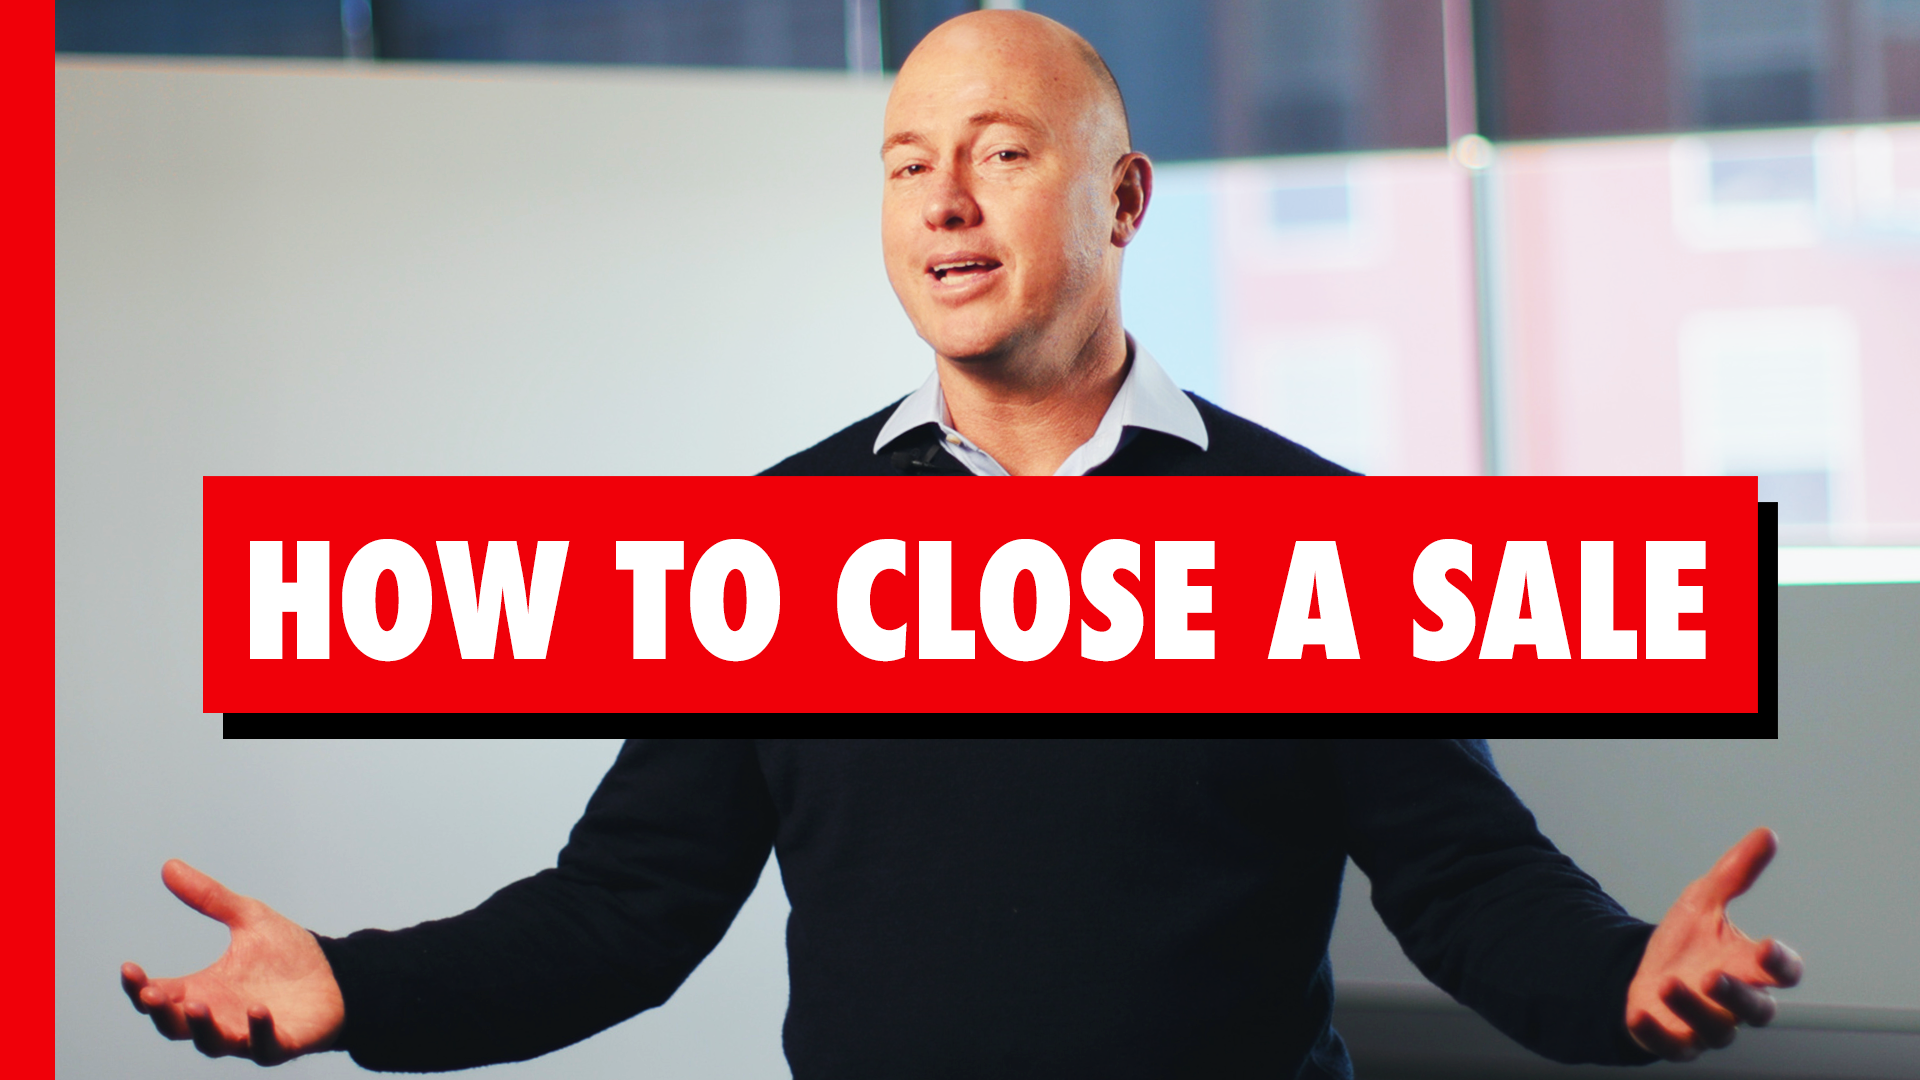 Trevor Ambrose Public Speaking Sales Training How To Close A Sale 1920x1080